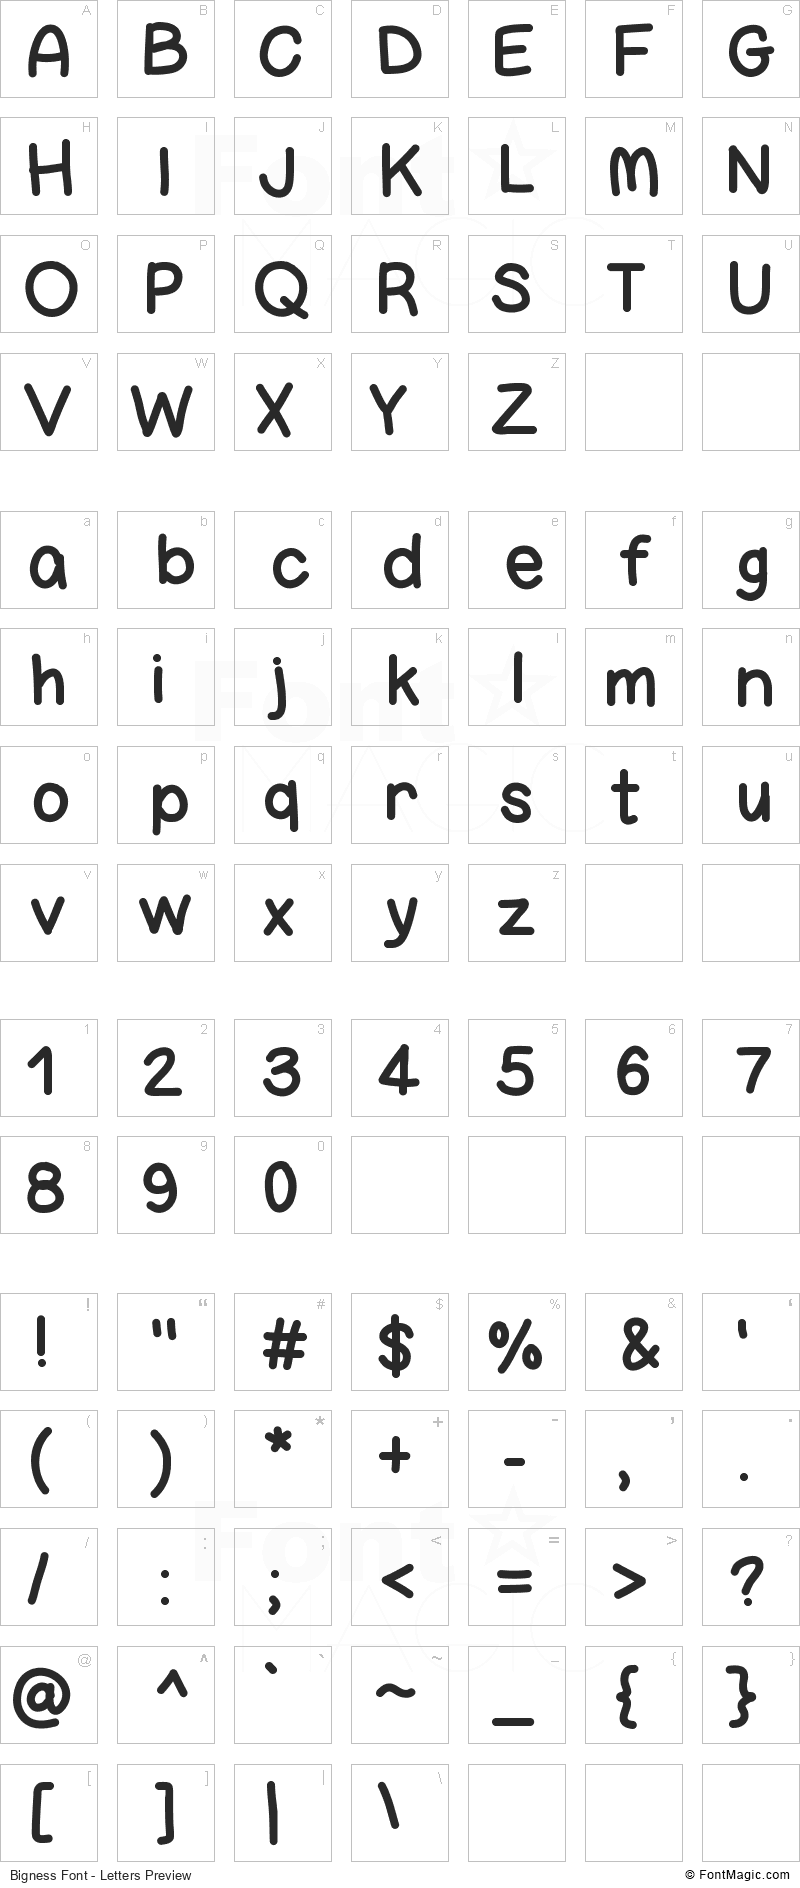 Bigness Font - All Latters Preview Chart